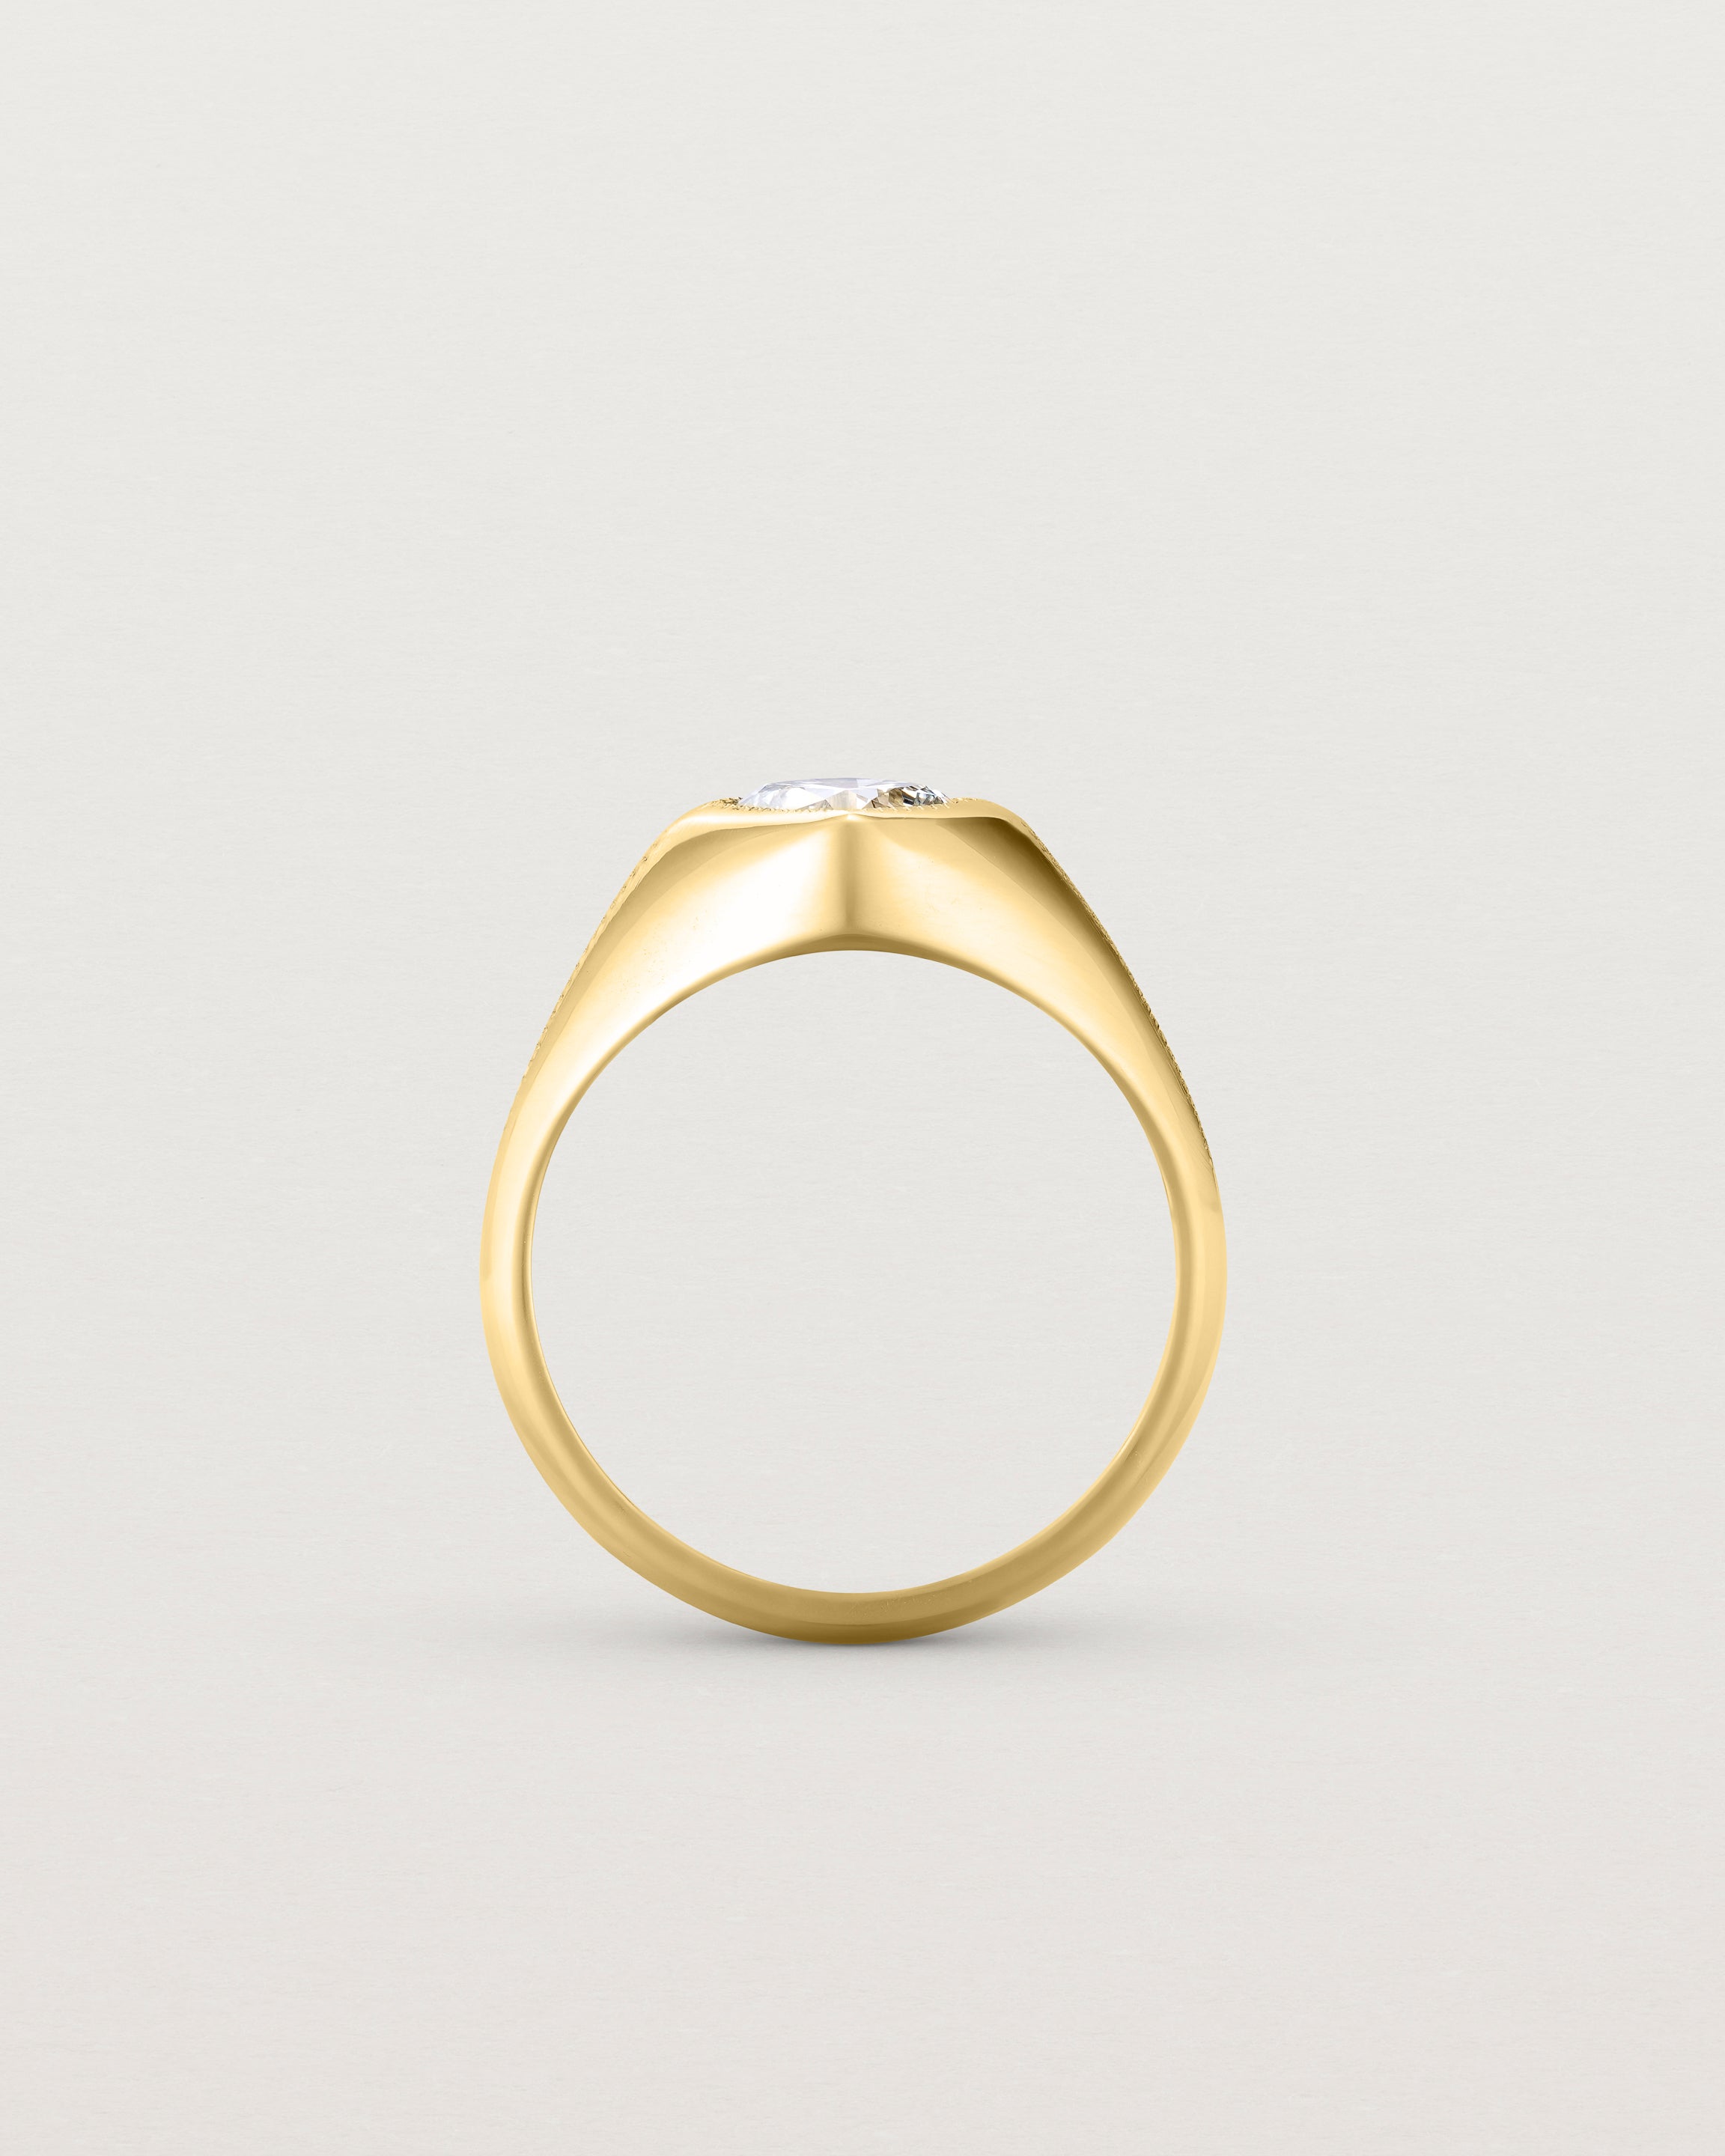 Standing view of the Átlas Cushion Signet | Laboratory Grown Diamond in yellow gold.